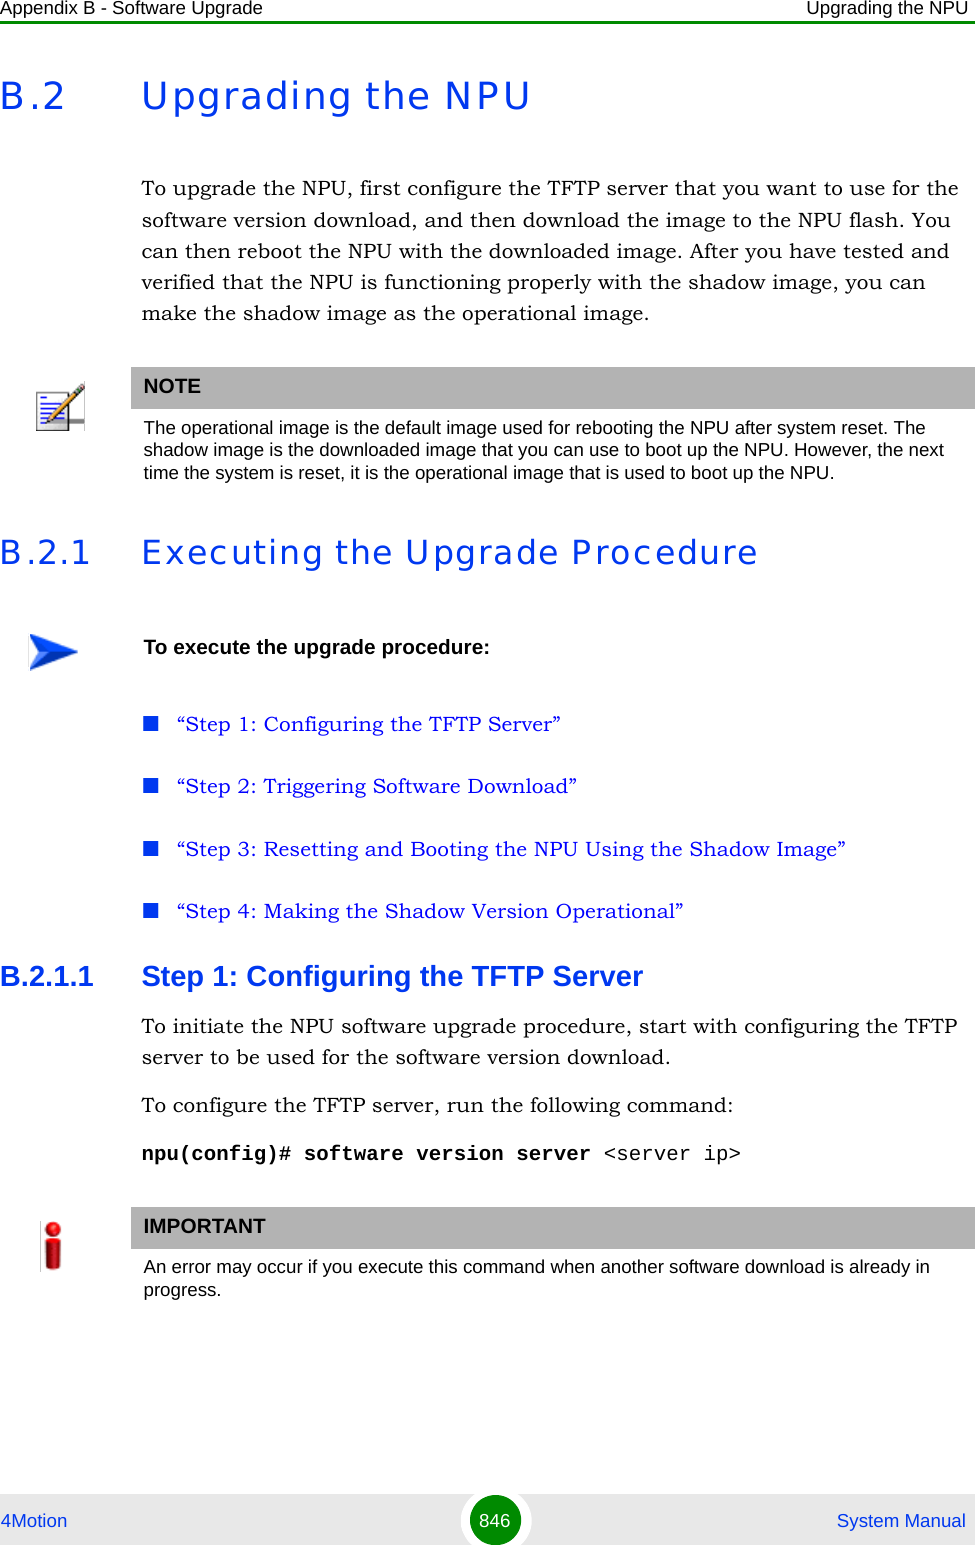 Appendix B - Software Upgrade Upgrading the NPU4Motion 846  System ManualB.2 Upgrading the NPUTo upgrade the NPU, first configure the TFTP server that you want to use for the software version download, and then download the image to the NPU flash. You can then reboot the NPU with the downloaded image. After you have tested and verified that the NPU is functioning properly with the shadow image, you can make the shadow image as the operational image.B.2.1 Executing the Upgrade Procedure“Step 1: Configuring the TFTP Server”“Step 2: Triggering Software Download”“Step 3: Resetting and Booting the NPU Using the Shadow Image”“Step 4: Making the Shadow Version Operational”B.2.1.1 Step 1: Configuring the TFTP ServerTo initiate the NPU software upgrade procedure, start with configuring the TFTP server to be used for the software version download. To configure the TFTP server, run the following command:npu(config)# software version server &lt;server ip&gt;NOTEThe operational image is the default image used for rebooting the NPU after system reset. The shadow image is the downloaded image that you can use to boot up the NPU. However, the next time the system is reset, it is the operational image that is used to boot up the NPU.To execute the upgrade procedure:IMPORTANTAn error may occur if you execute this command when another software download is already in progress.